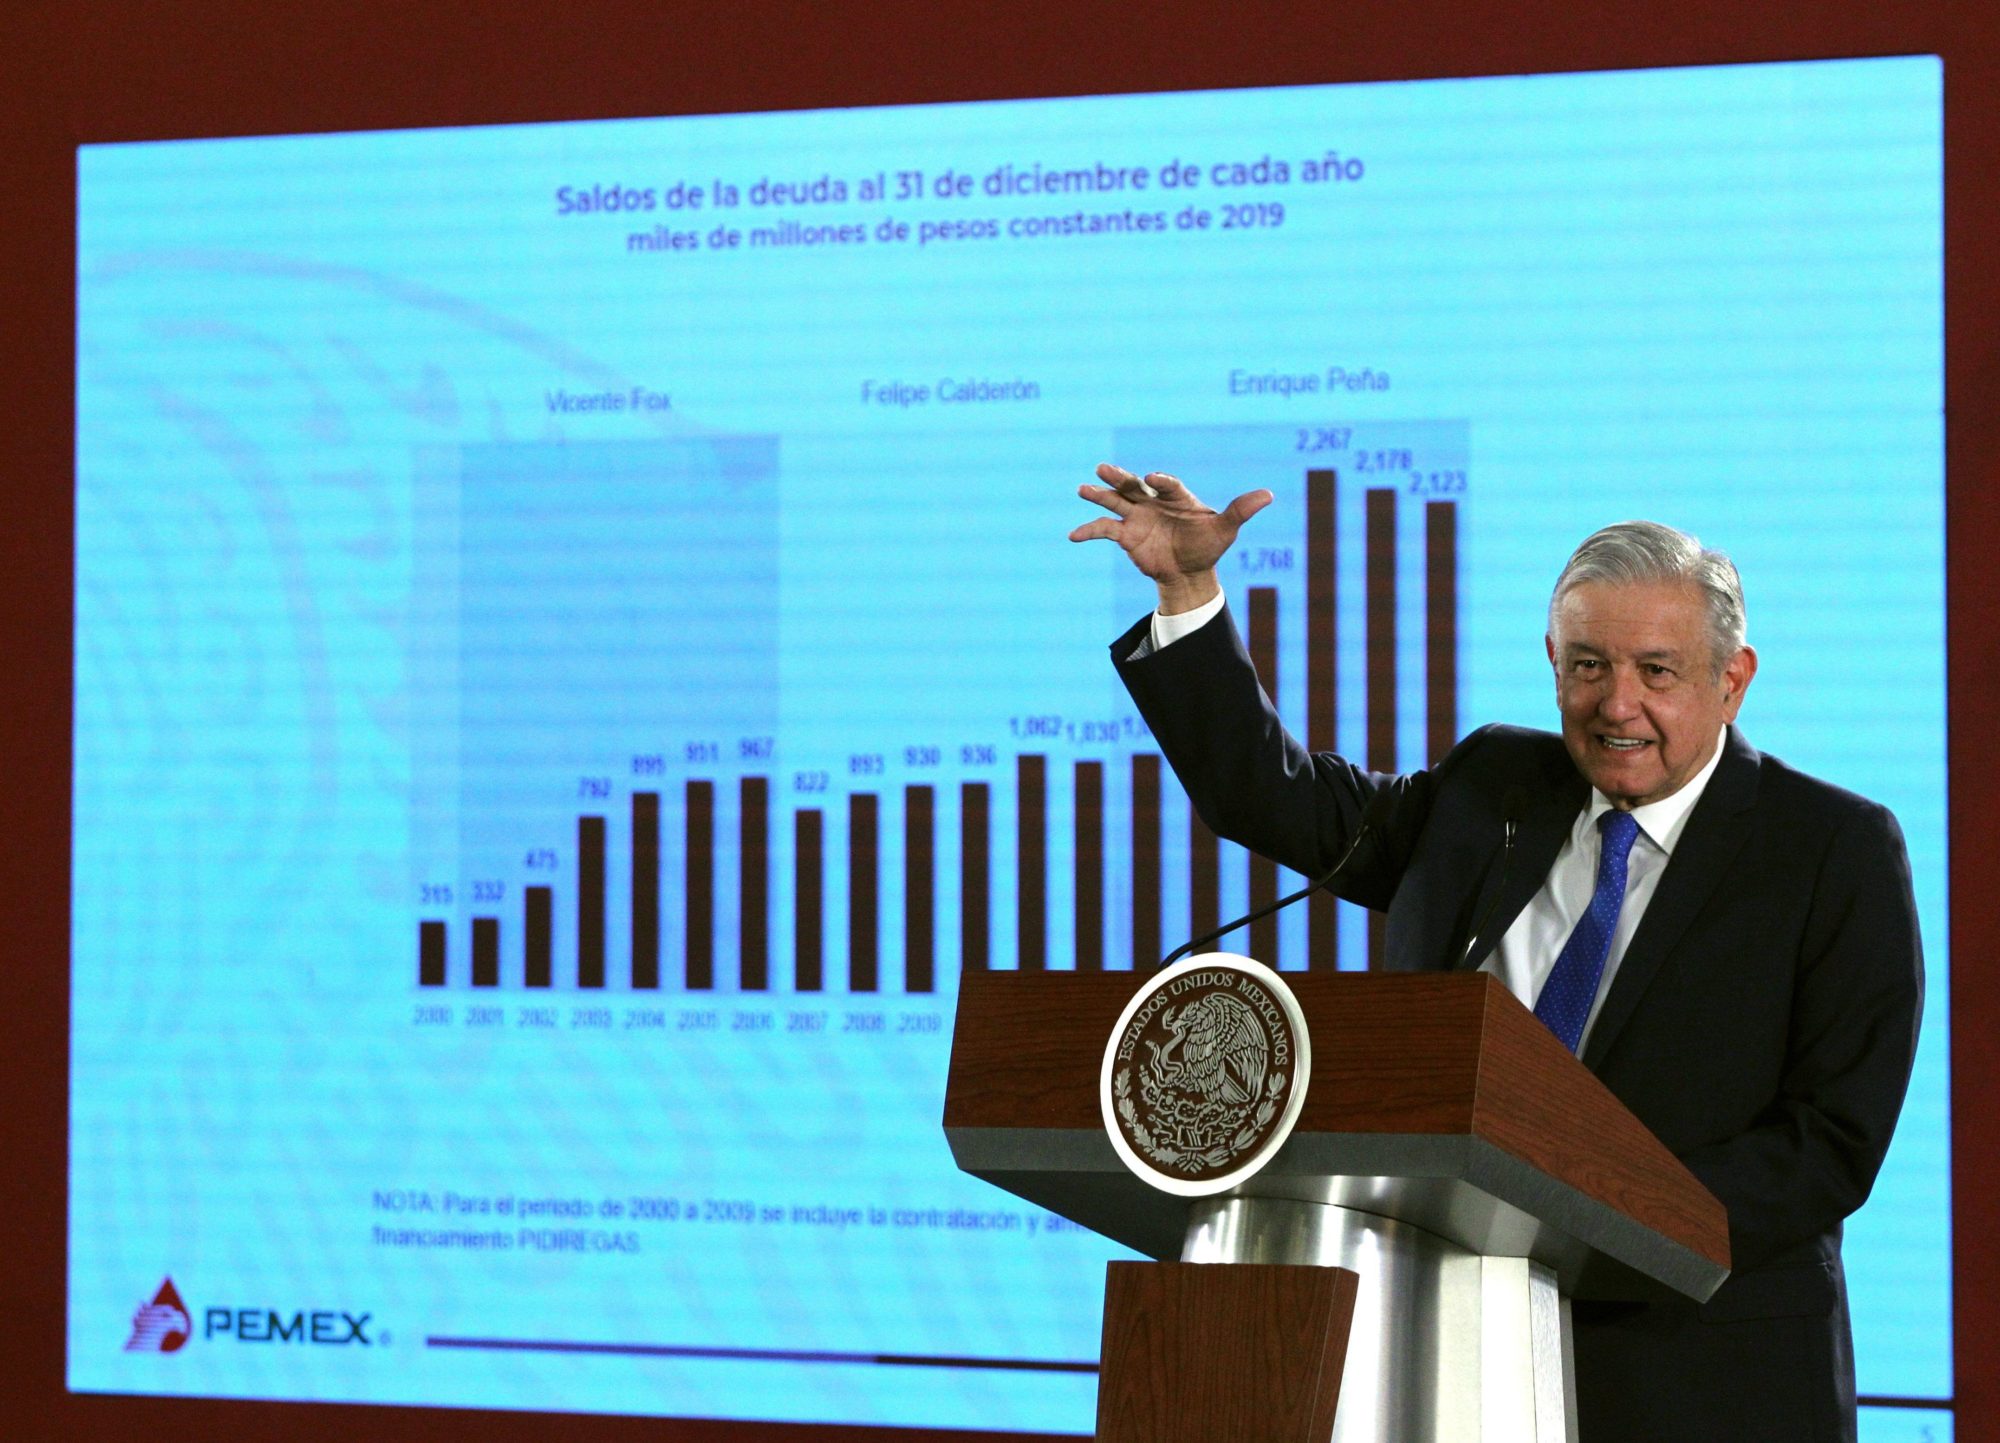 <p>Mexican President Andrés Manuel López Obrador at a July 2019 press conference on his plan for state-national oil company Pemex. Since then oil prices has fallen drastically (image EFE/ <a href="https://www.alamy.com/mexican-president-andres-manuel-lopez-obrador-speaks-during-a-press-conference-at-the-national-palace-in-mexico-city-mexico-16-july-2019-the-mexican-government-presented-the-business-plan-of-petroleos-mexicanos-pemex-that-through-a-reduction-of-up-to-11-of-the-tax-burden-and-a-multi-million-dollar-investment-seeks-to-refloat-the-state-oil-company-suffering-from-debt-and-a-fall-in-production-and-refining-efe-mario-guzman-image260413457.html?pv=1&amp;stamp=2&amp;imageid=8BF3A6A4-447F-46BB-A3AD-70ECC5E3909B&amp;p=402381&amp;n=0&amp;orientation=0&amp;pn=1&amp;searchtype=0&amp;IsFromSearch=1&amp;srch=foo%3dbar%26st%3d0%26pn%3d1%26ps%3d100%26sortby%3d2%26resultview%3dsortbyPopular%26npgs%3d0%26qt%3dpemex%26qt_raw%3dpemex%26lic%3d3%26mr%3d0%26pr%3d0%26ot%3d0%26creative%3d%26ag%3d0%26hc%3d0%26pc%3d%26blackwhite%3d%26cutout%3d%26tbar%3d1%26et%3d0x000000000000000000000%26vp%3d0%26loc%3d0%26imgt%3d0%26dtfr%3d20190331%26dtto%3d20210331%26size%3d0xFF%26archive%3d1%26groupid%3d%26pseudoid%3d%26a%3d%26cdid%3d%26cdsrt%3d%26name%3d%26qn%3d%26apalib%3d%26apalic%3d%26lightbox%3d%26gname%3d%26gtype%3d%26xstx%3d0%26simid%3d%26saveQry%3d%26editorial%3d1%26nu%3d%26t%3d%26edoptin%3d%26customgeoip%3dGB%26cap%3d1%26cbstore%3d1%26vd%3d0%26lb%3d%26fi%3d2%26edrf%3d0%26ispremium%3d1%26flip%3d0%26pl%3d">Alamy</a>)</p>